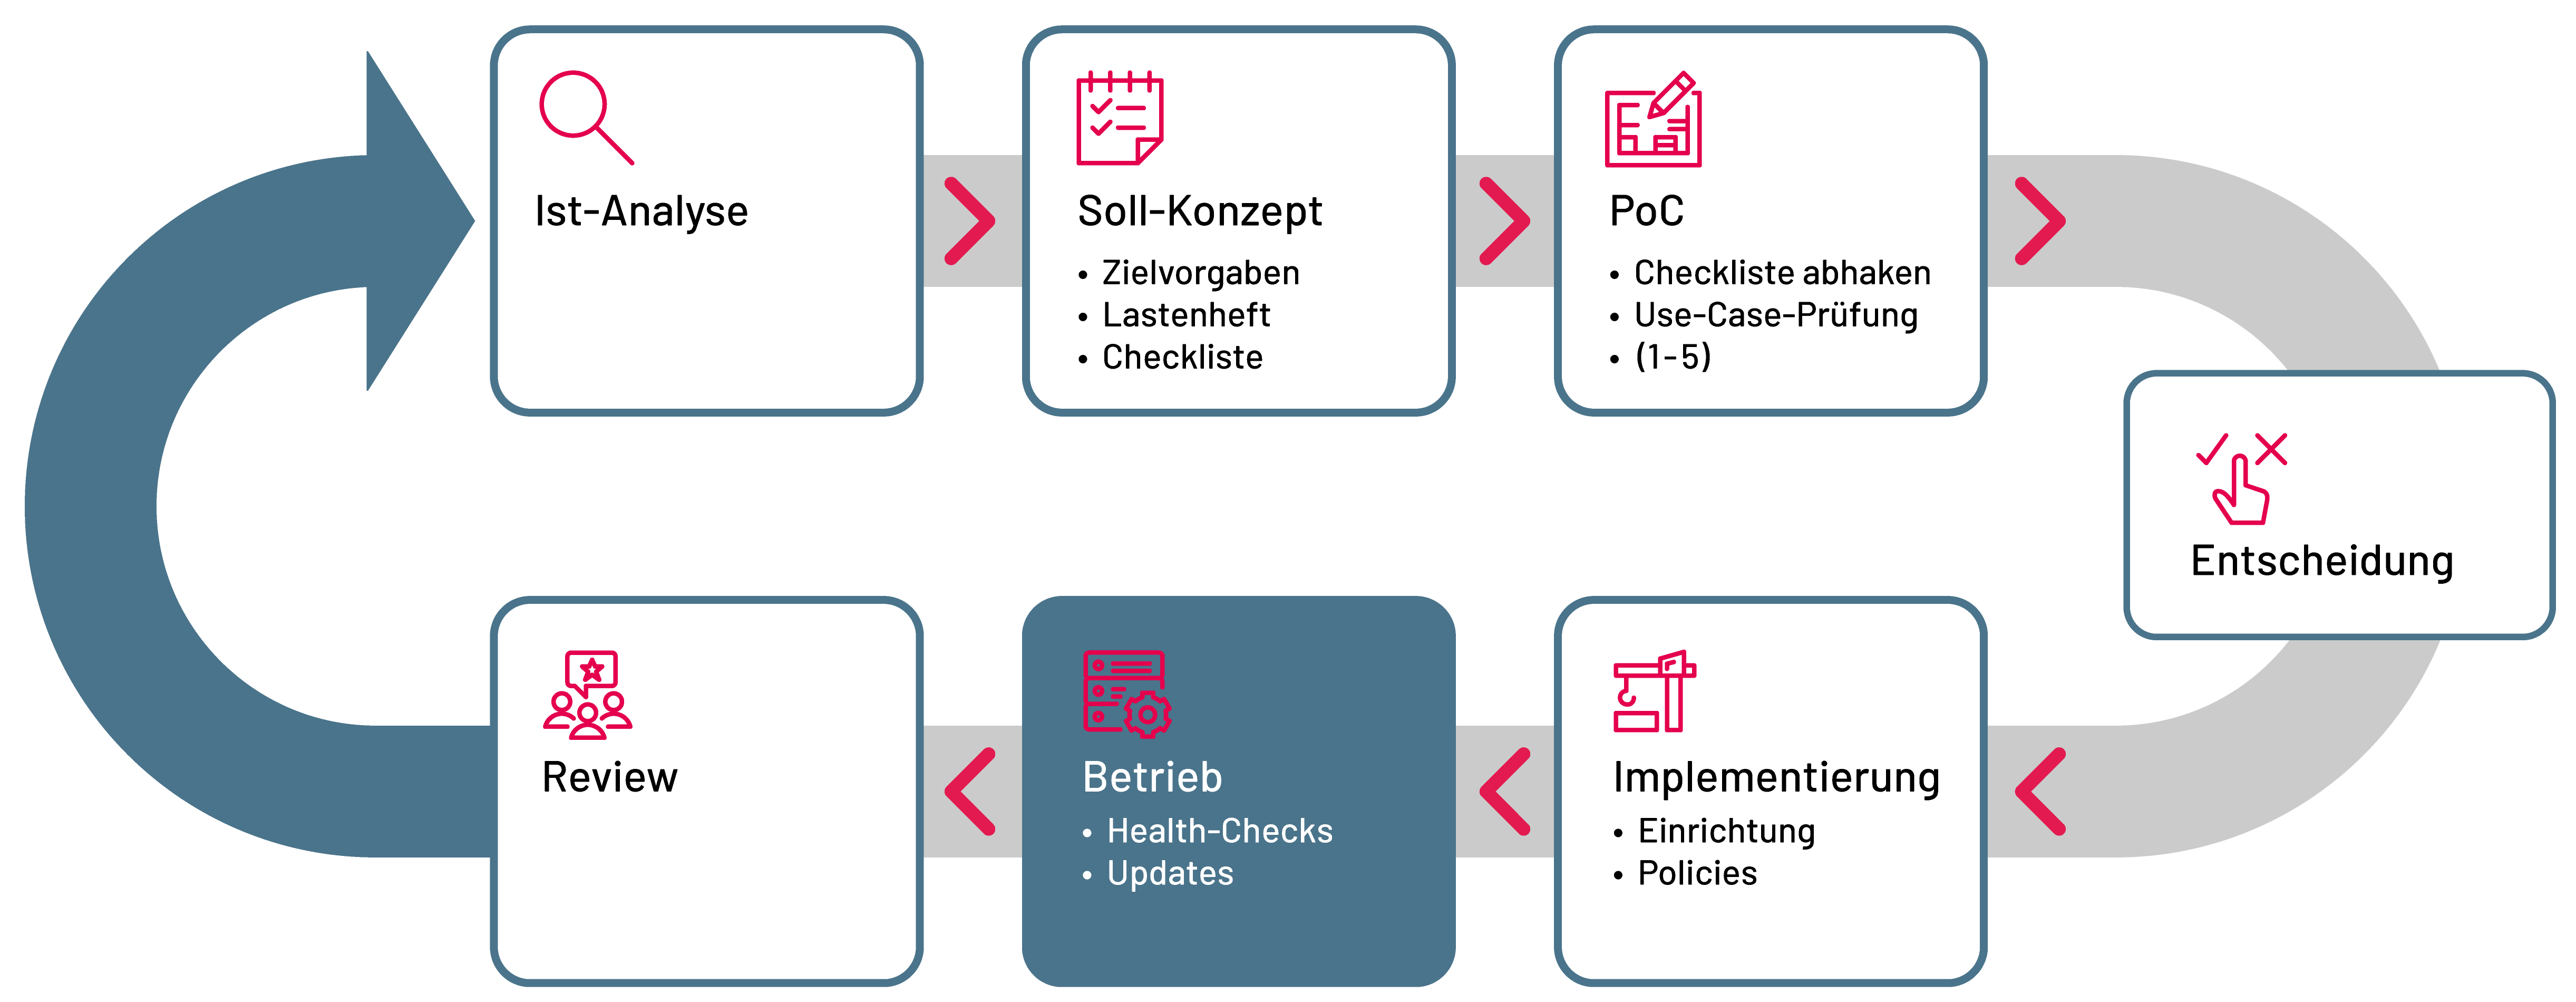 Secure Enterprise Apps - Betrieb als Managed Service - SYSTAG GmbH